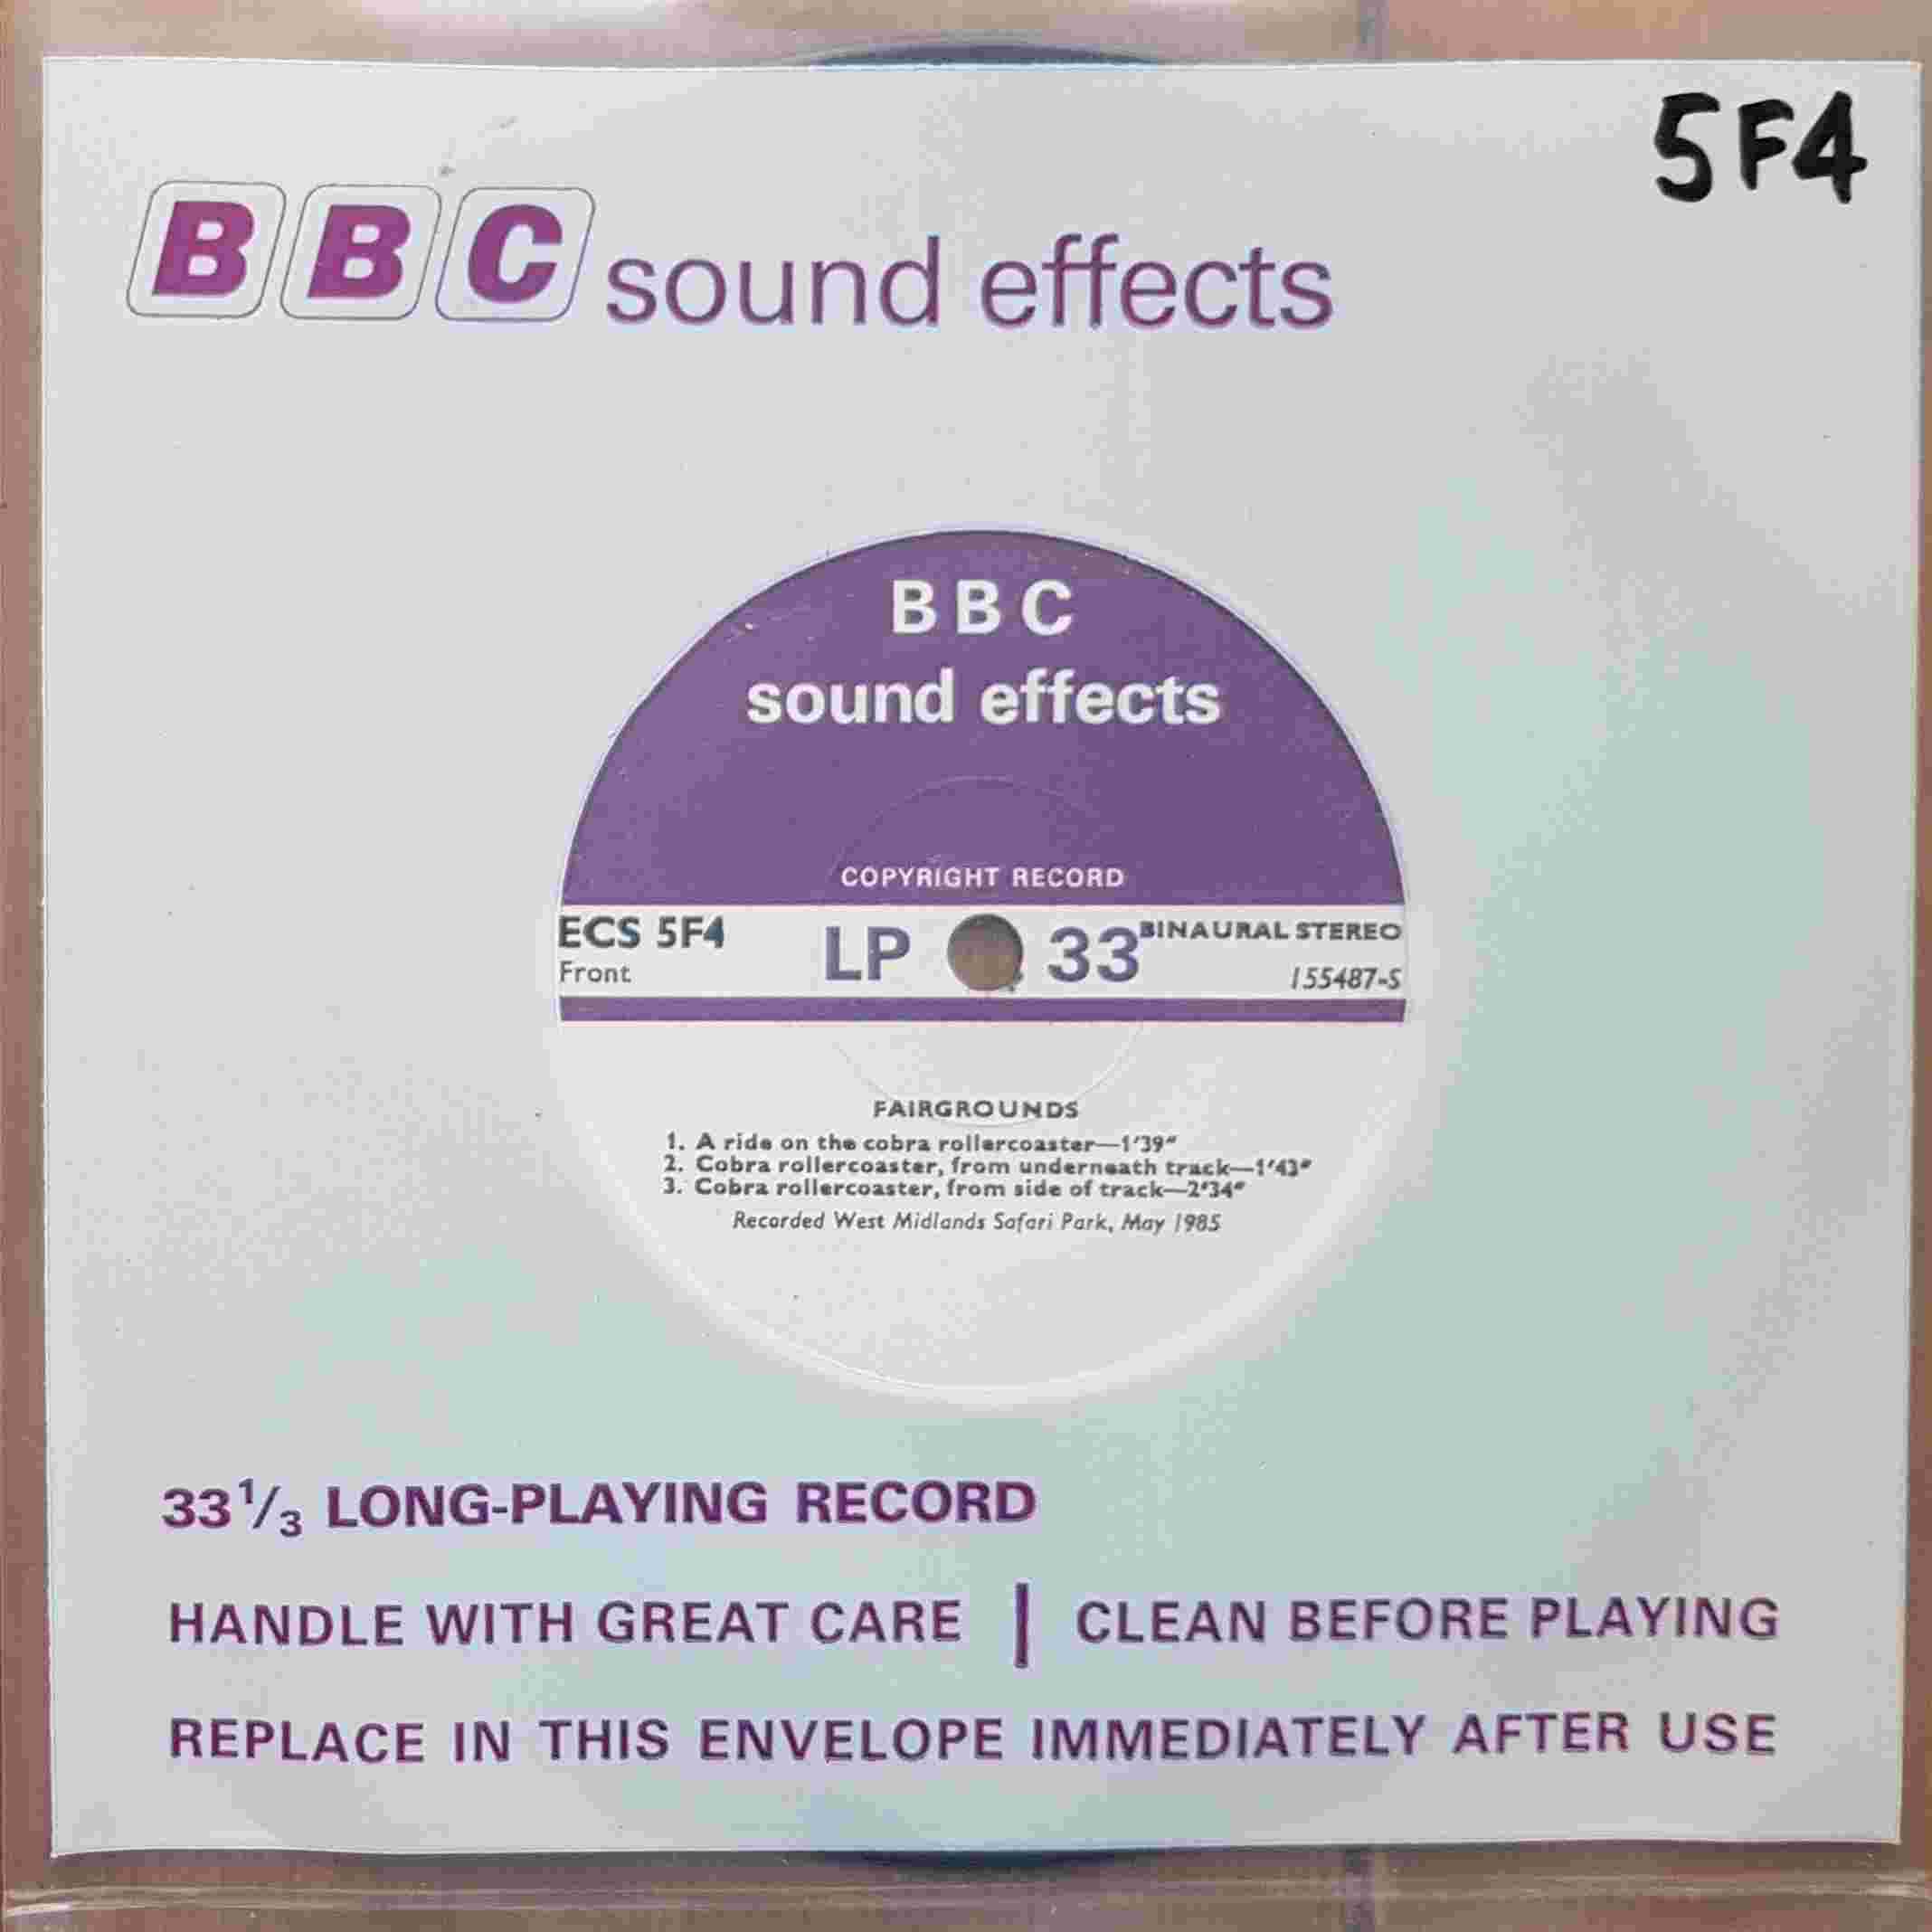 Picture of ECS 5F4 Fairgrounds by artist Not registered from the BBC singles - Records and Tapes library